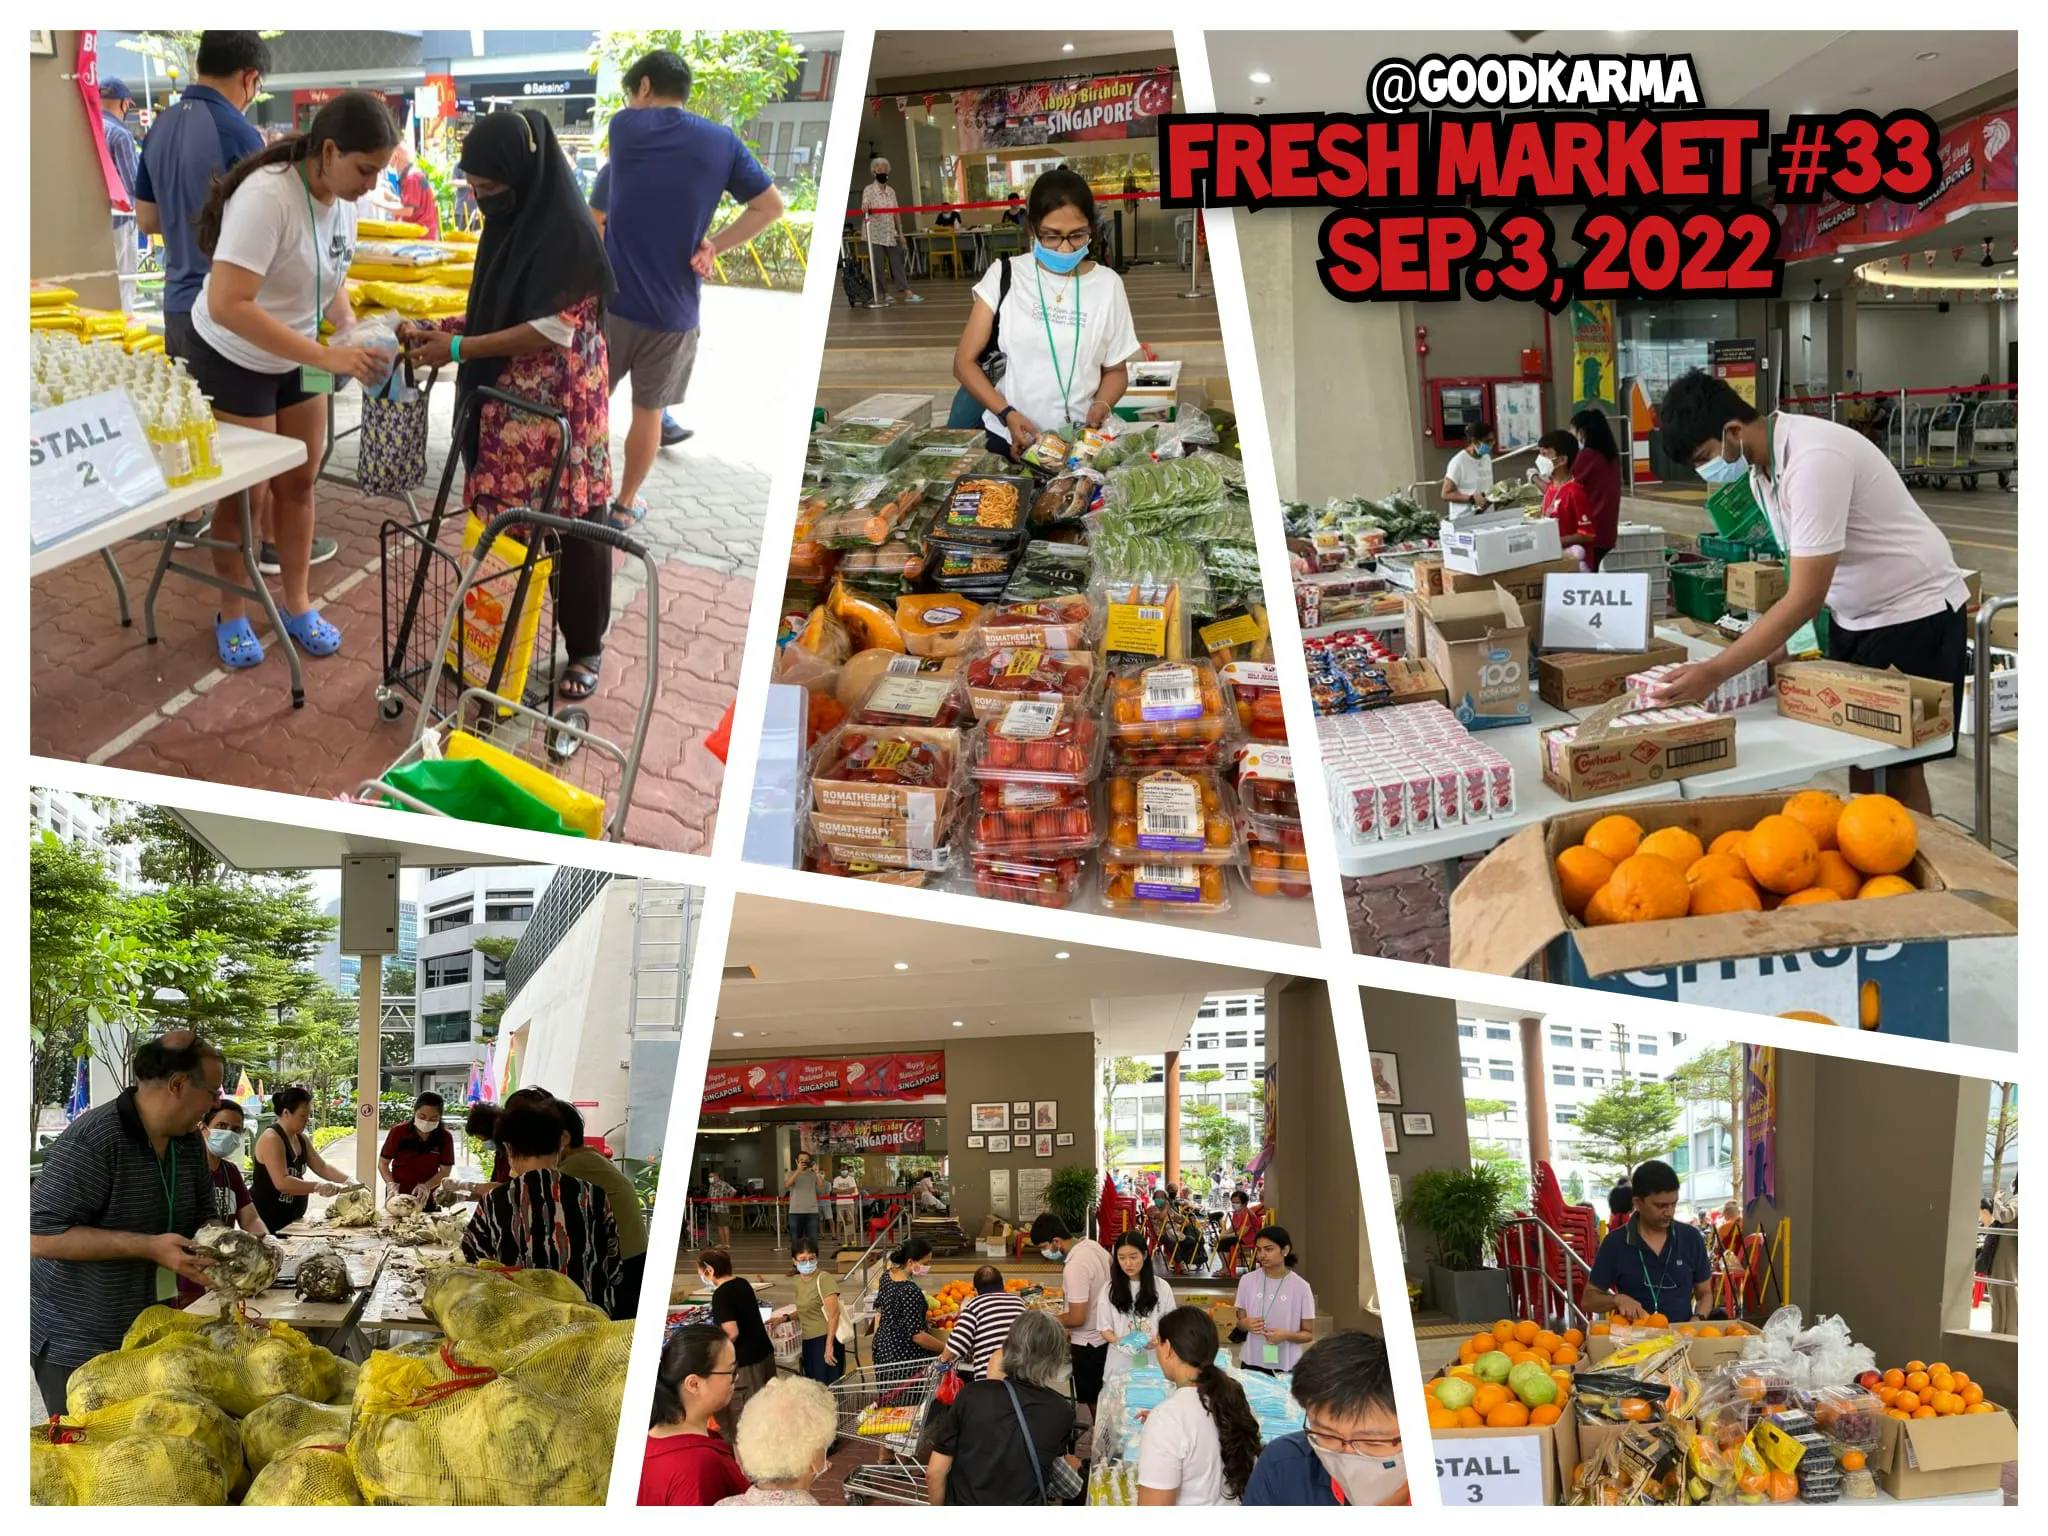 Fresh Food Market in action